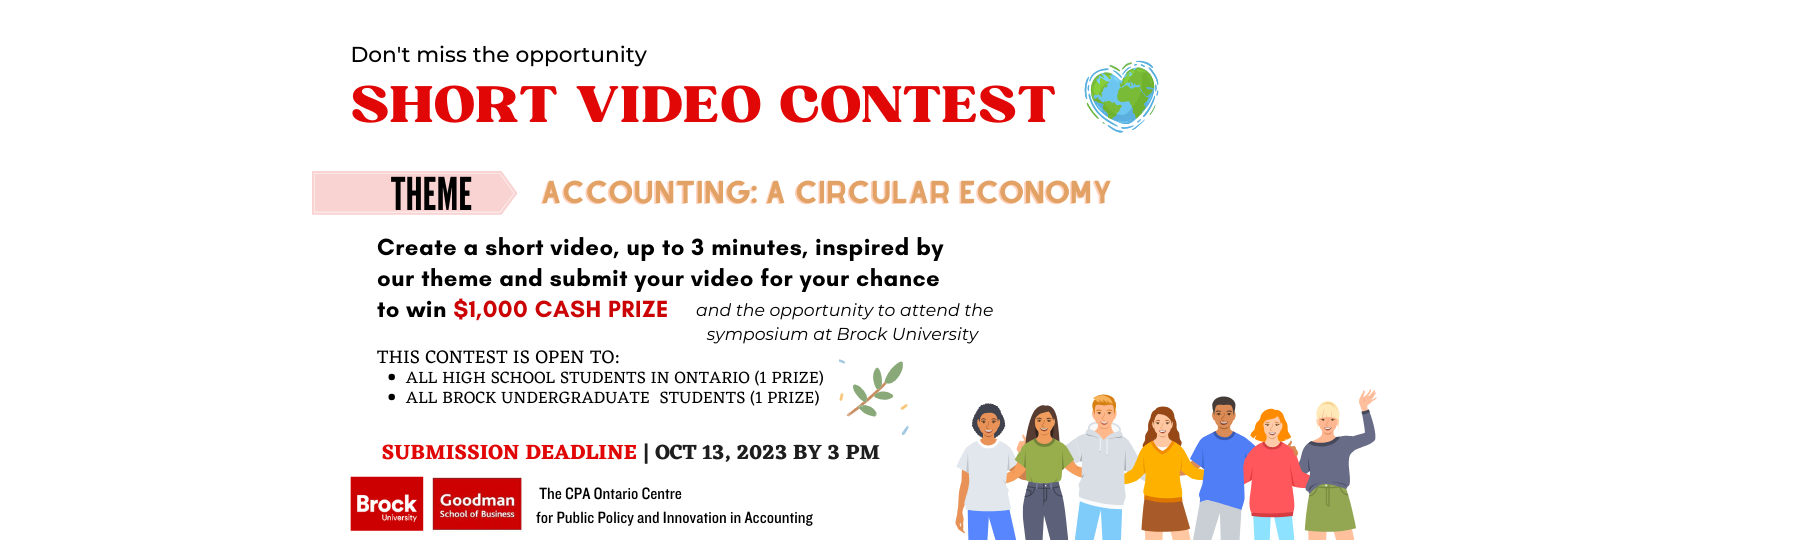 Video contest Flyer 